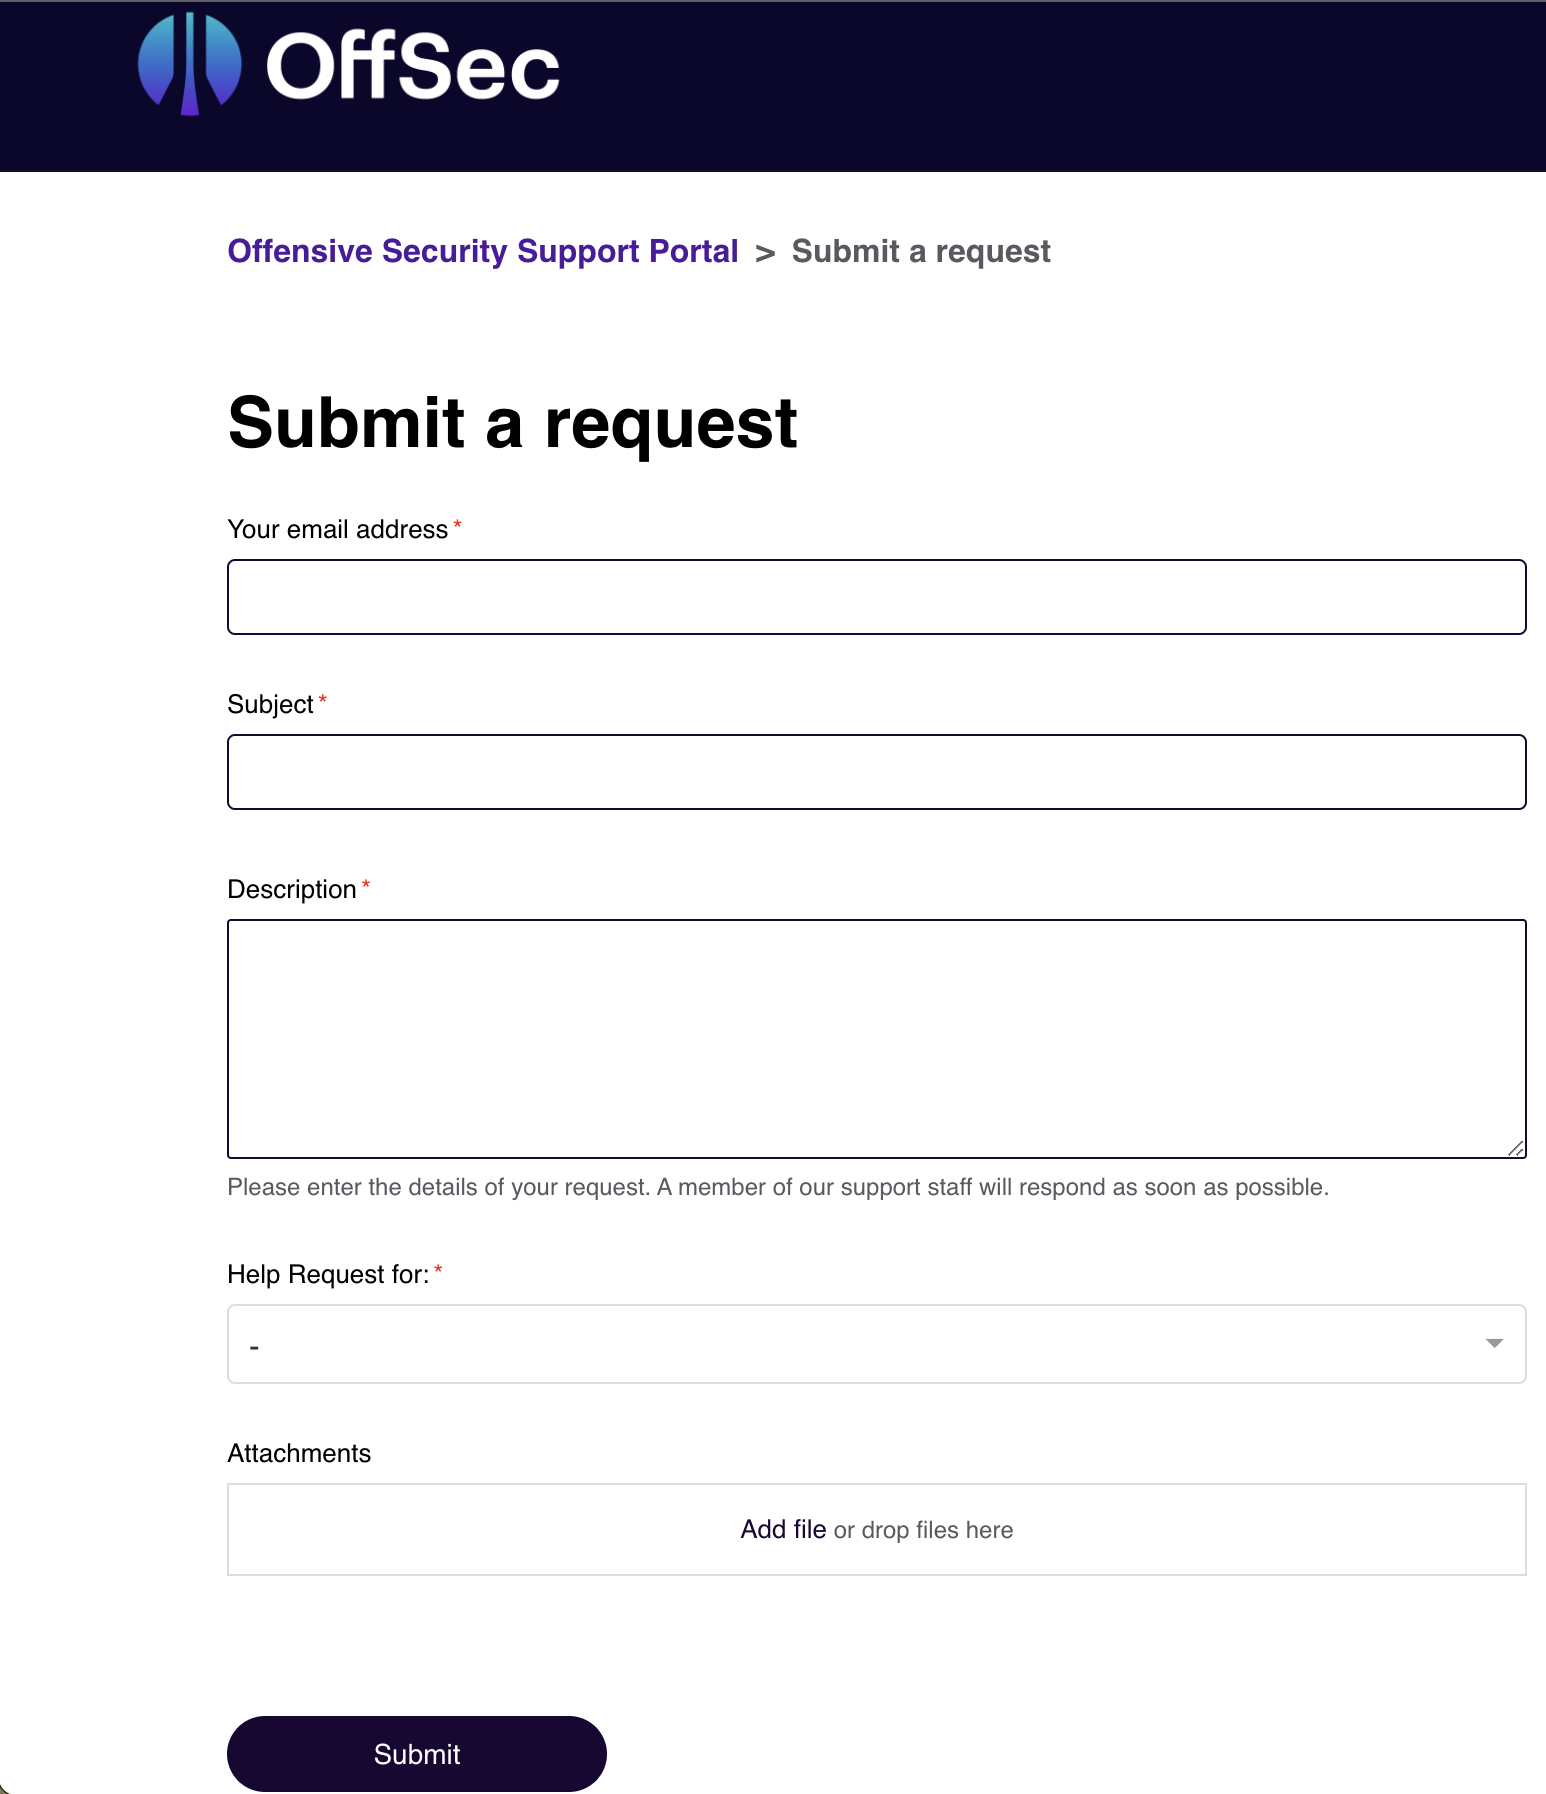 Submit_a_request.png